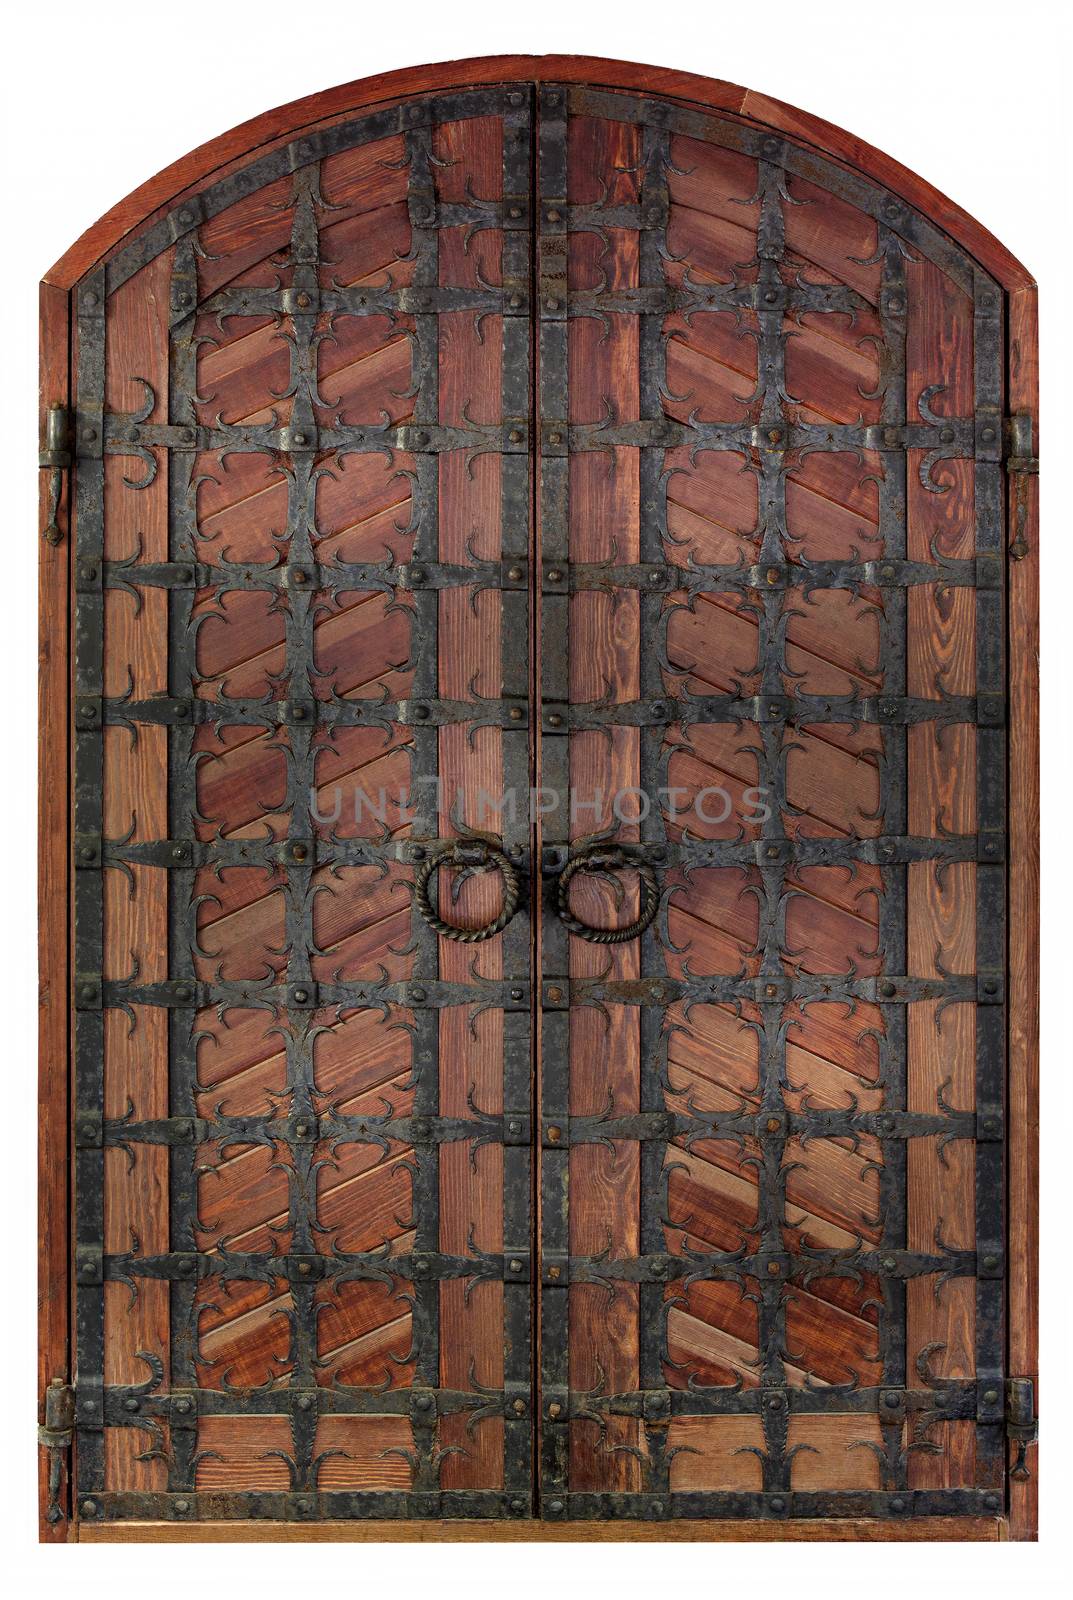 Ancient antique wooden doors are covered with wrought iron lattice and cross bars. by Sergii